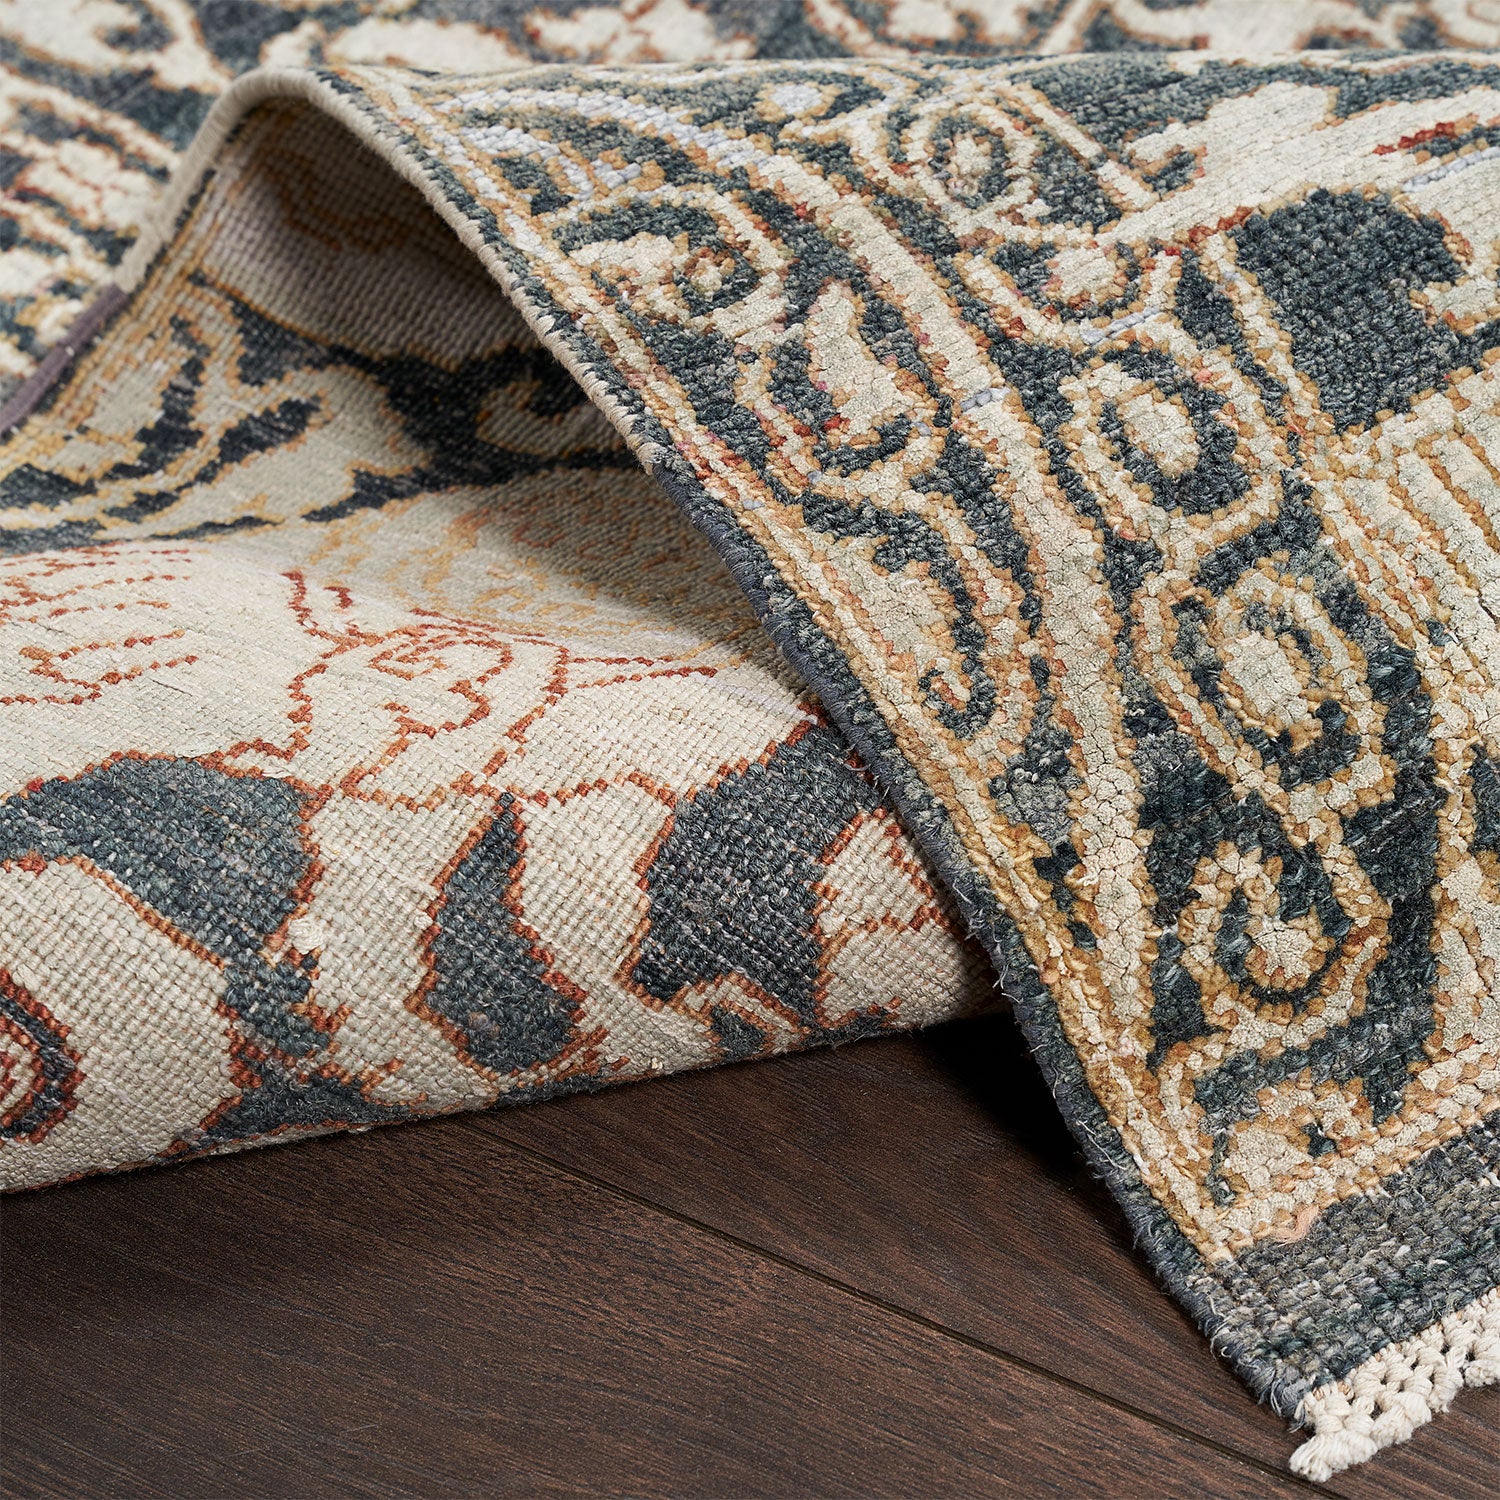 Intricate vintage rug with traditional patterns and rich color palette.